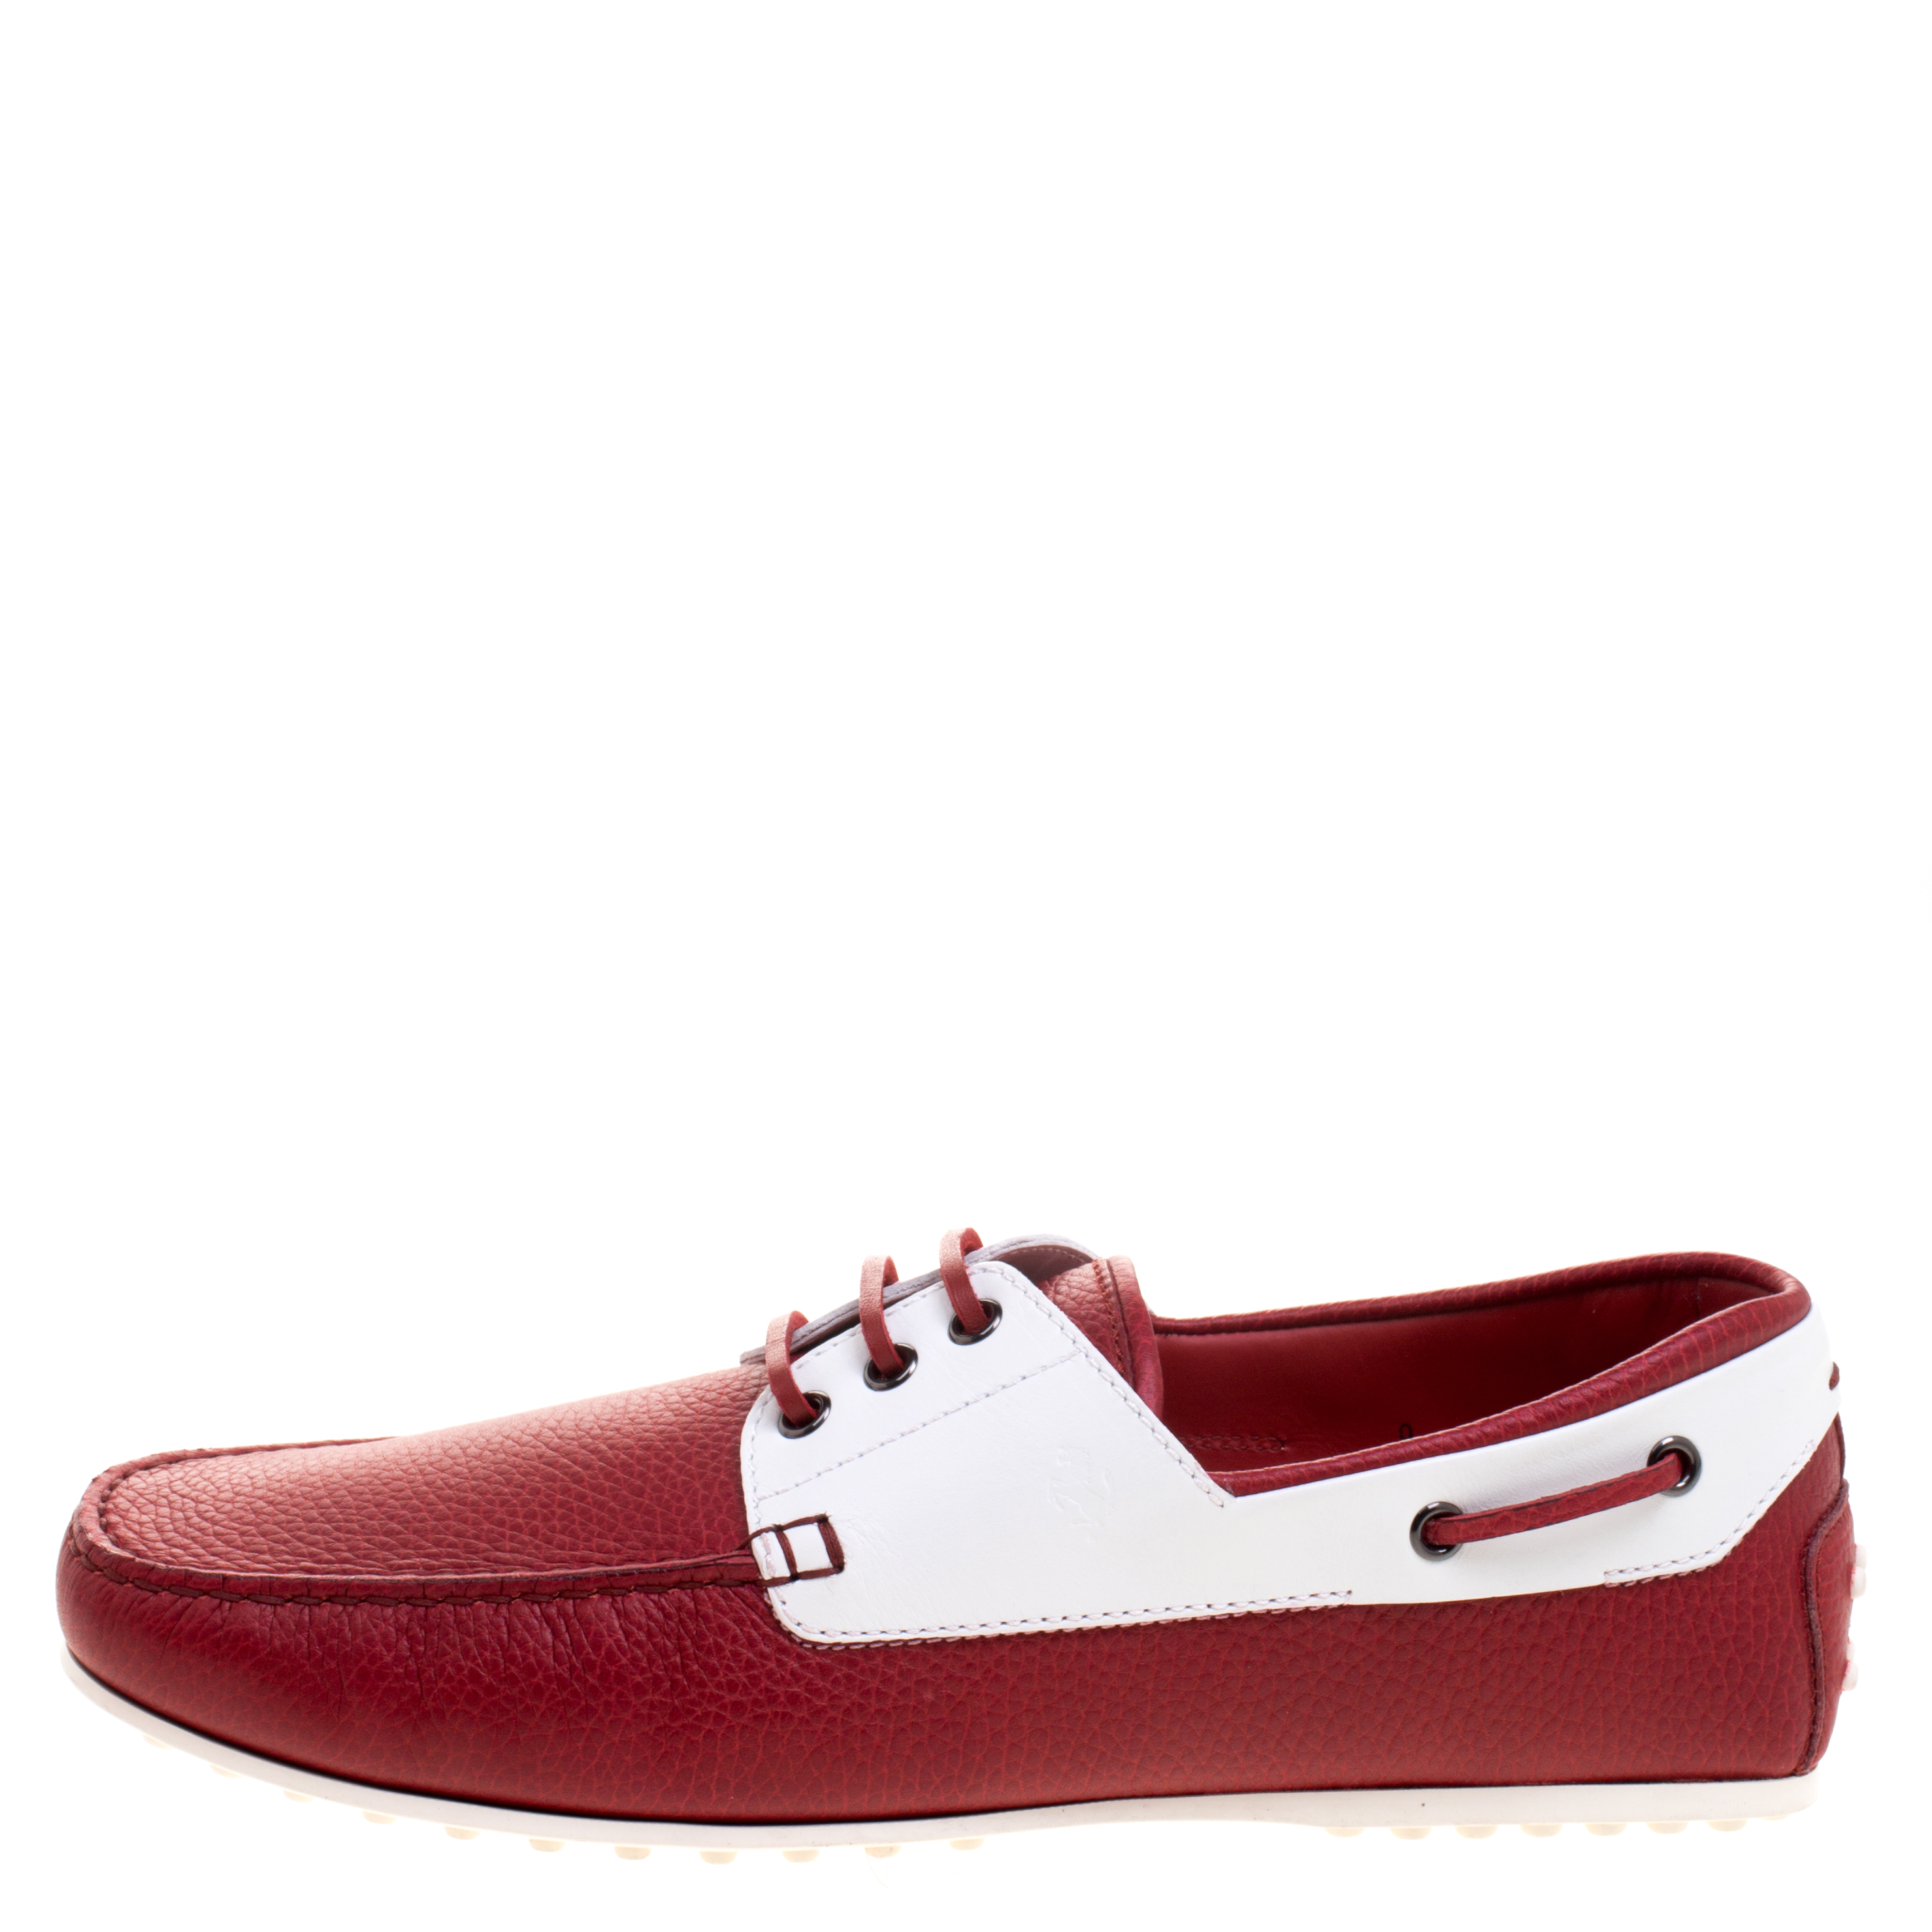 tod's for ferrari sneakers in leather